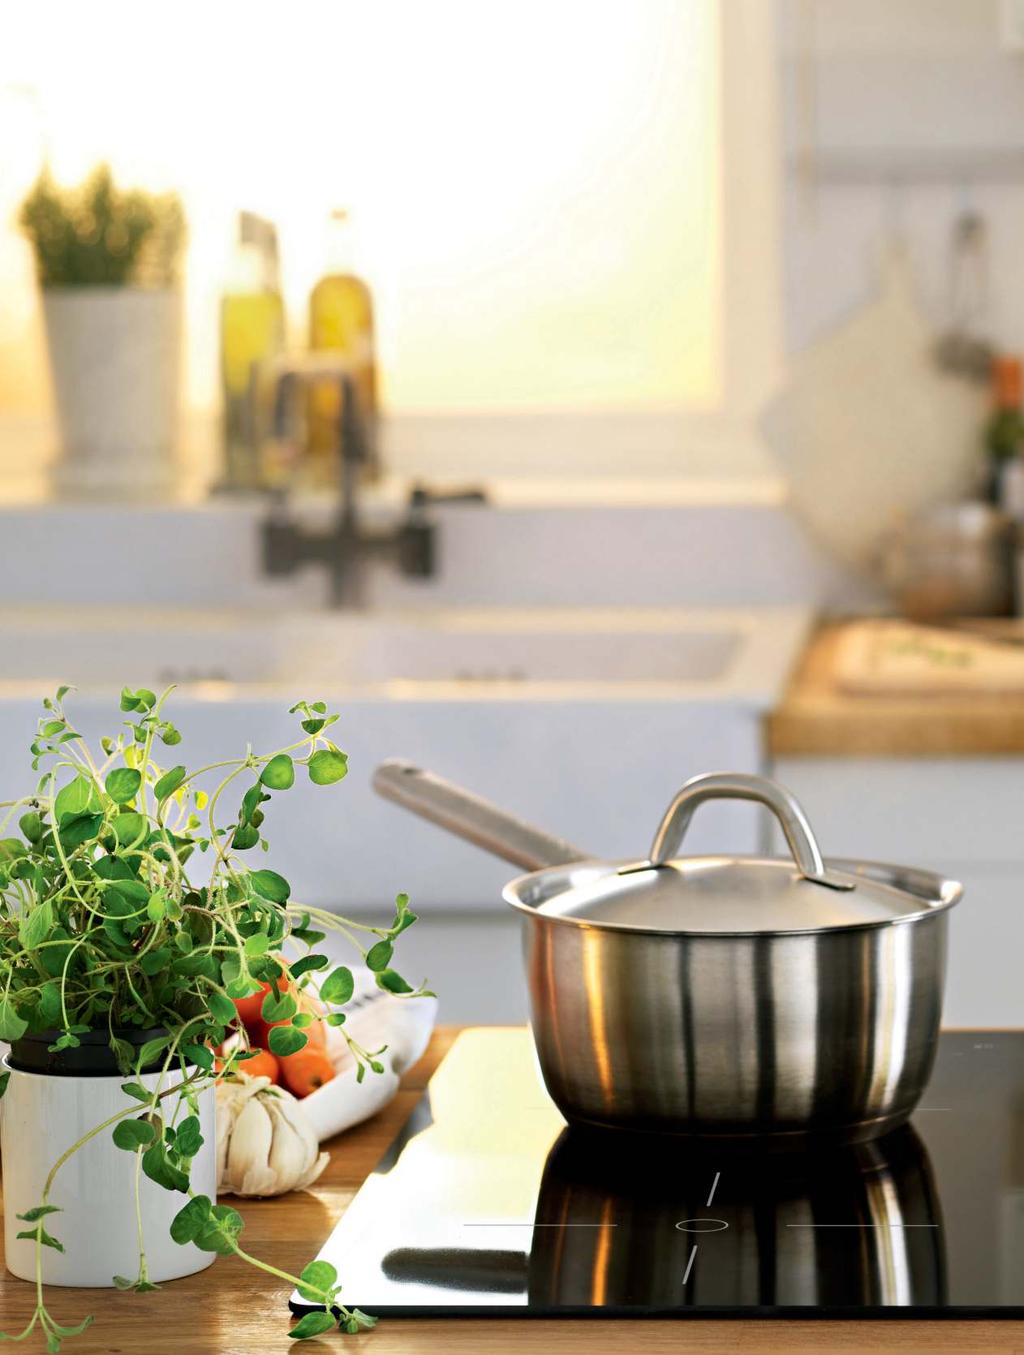 You can boost your cooking with an induction hob, saving up to 40% energy